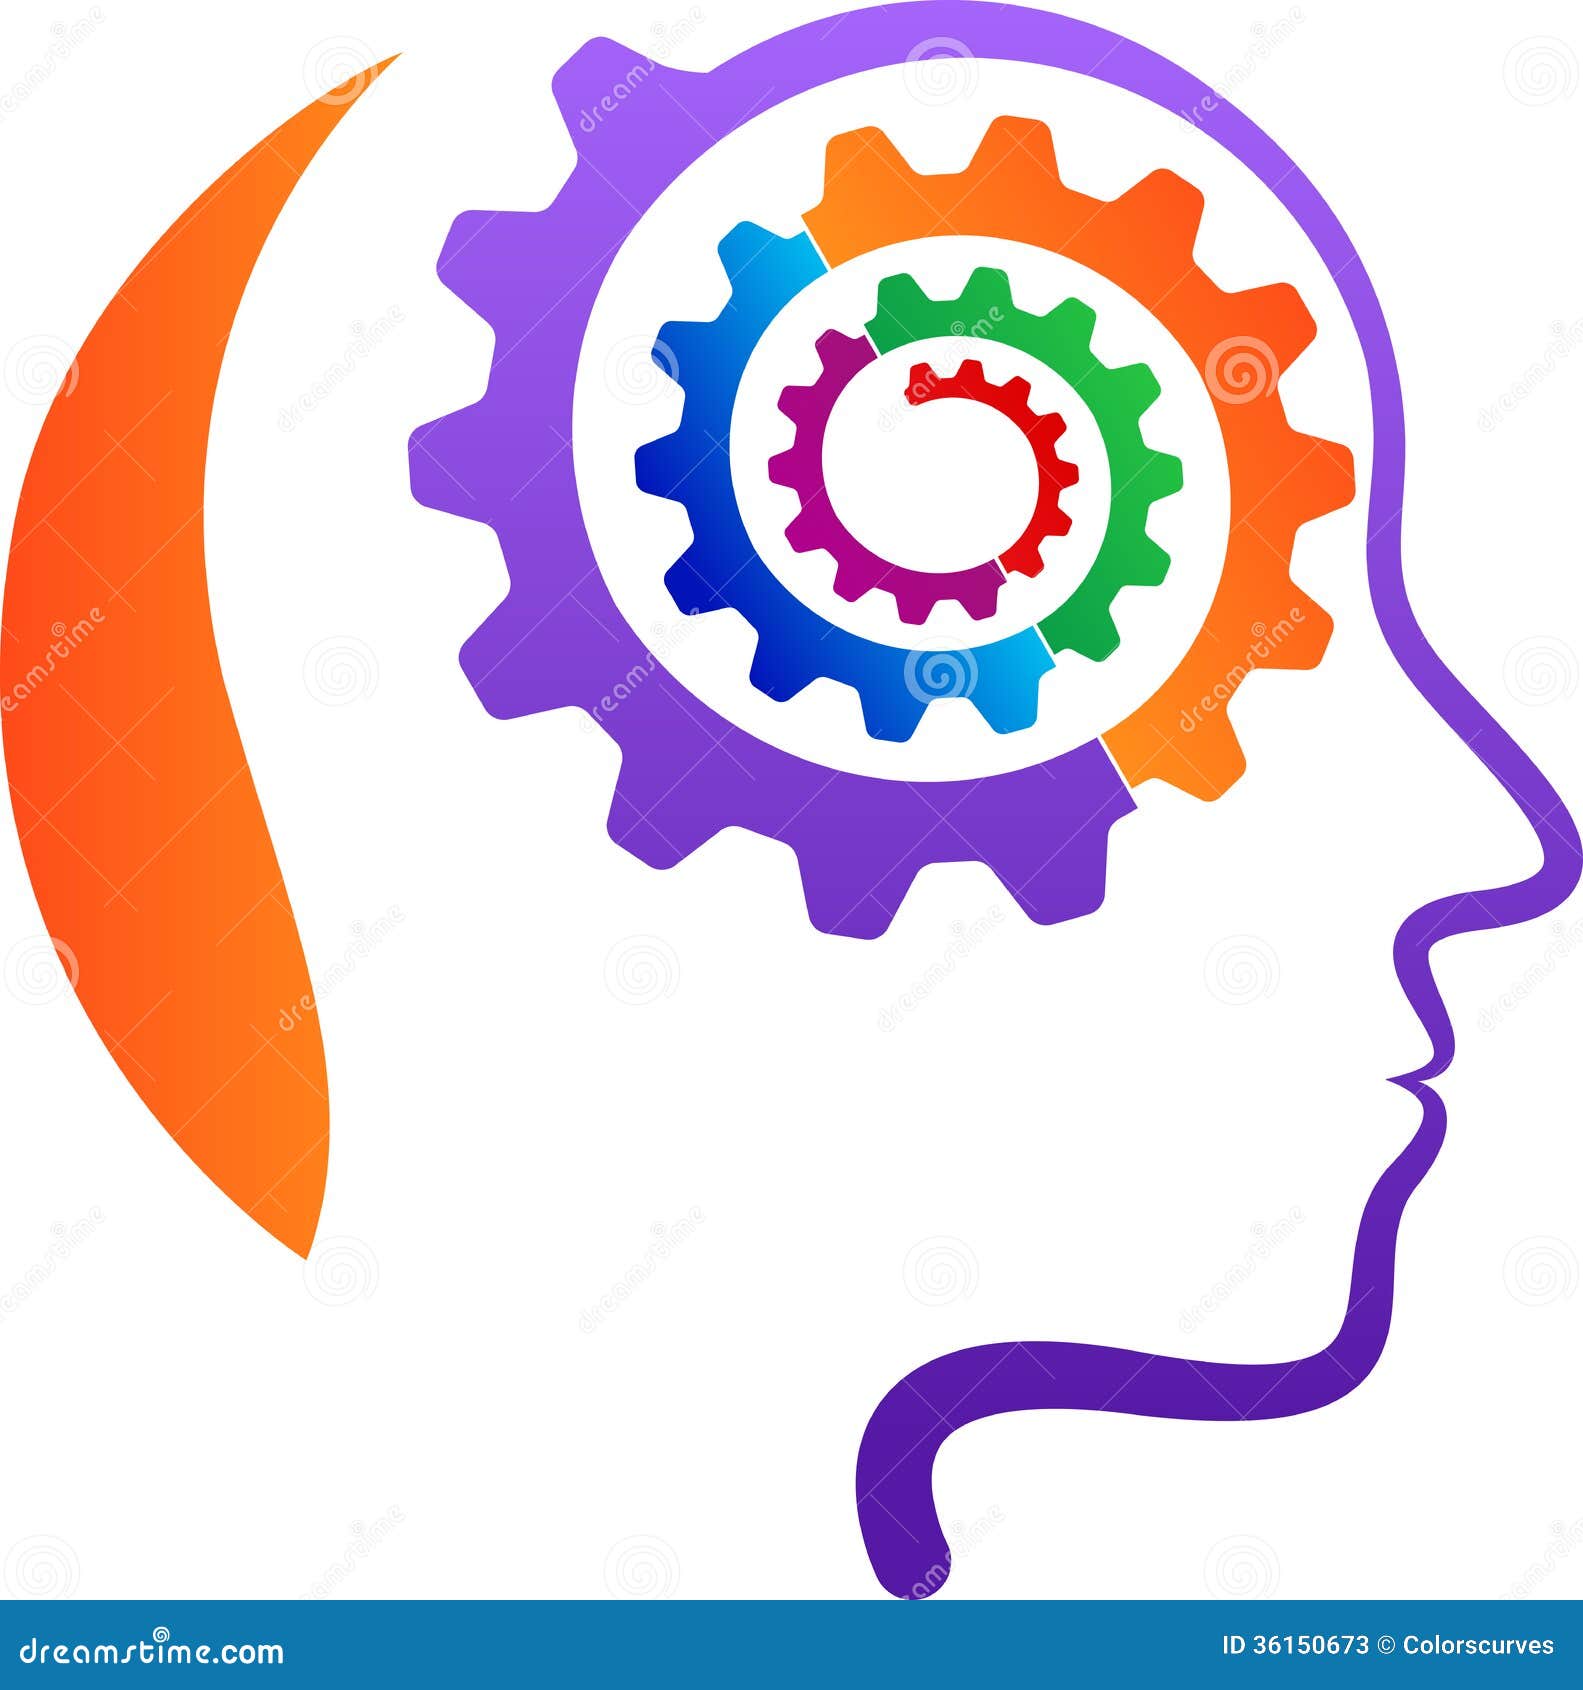 vector drawing represents head with gear mind design.